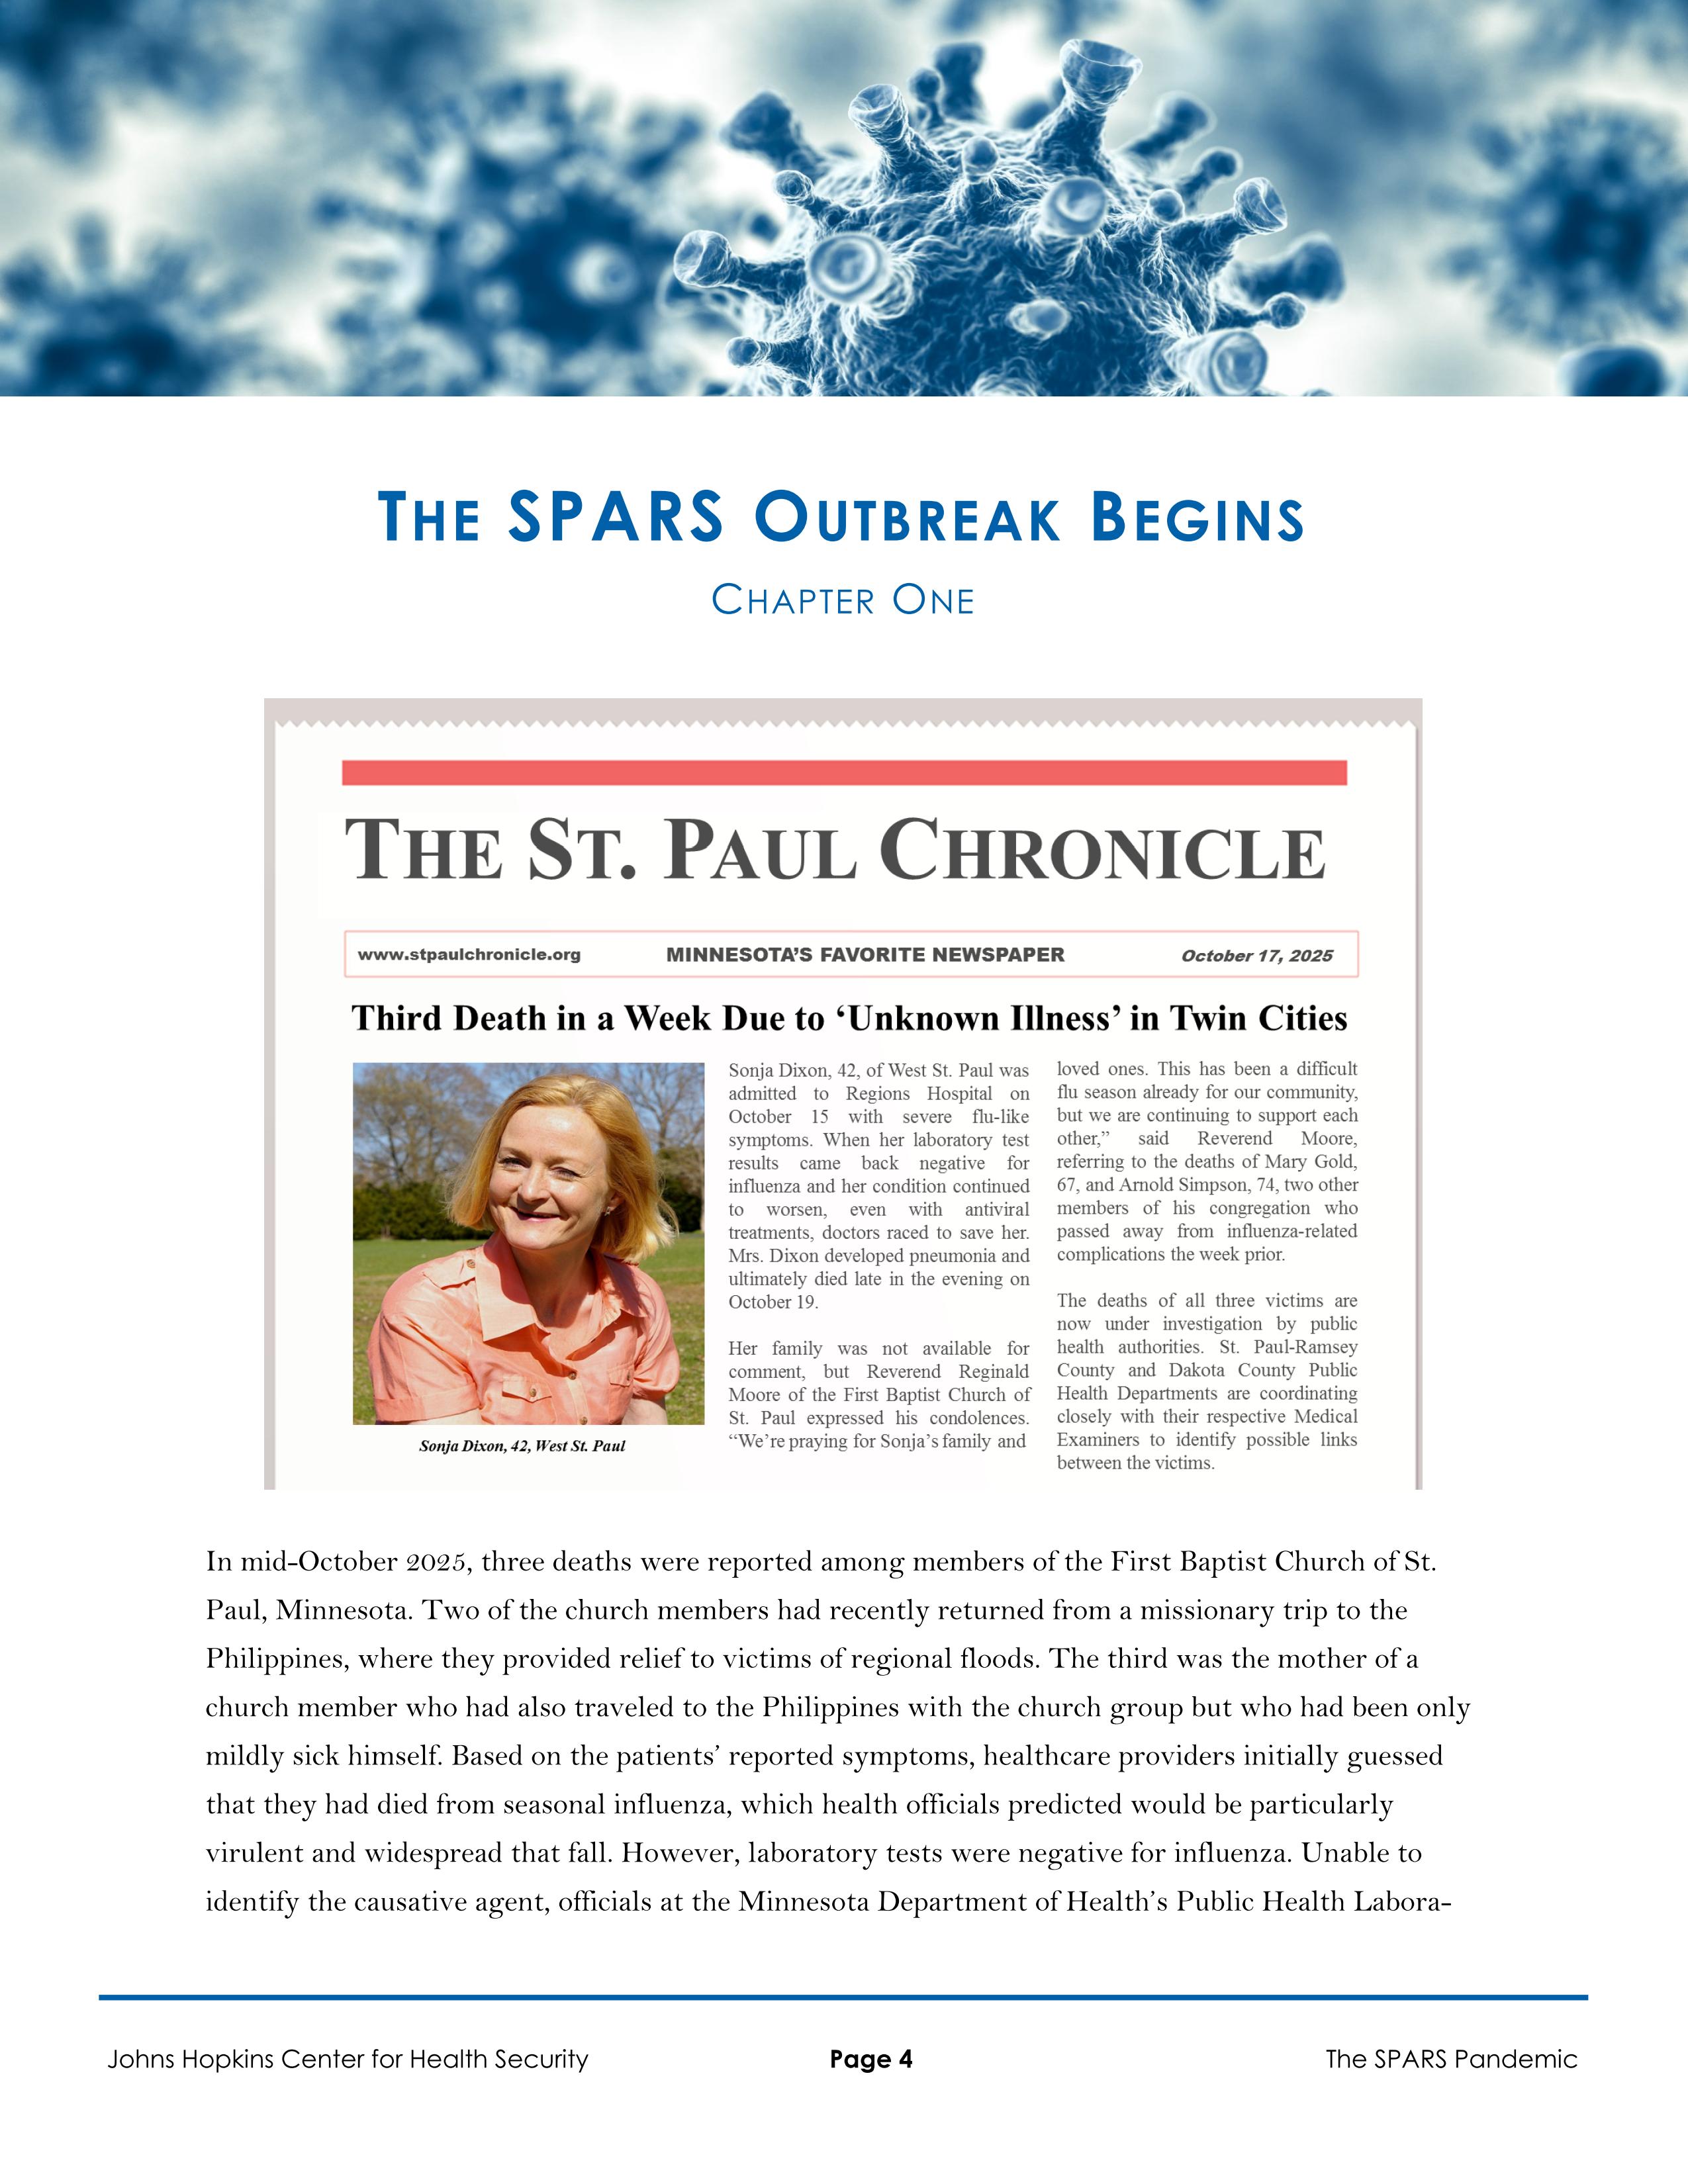 SPARS report from 2017 - pages